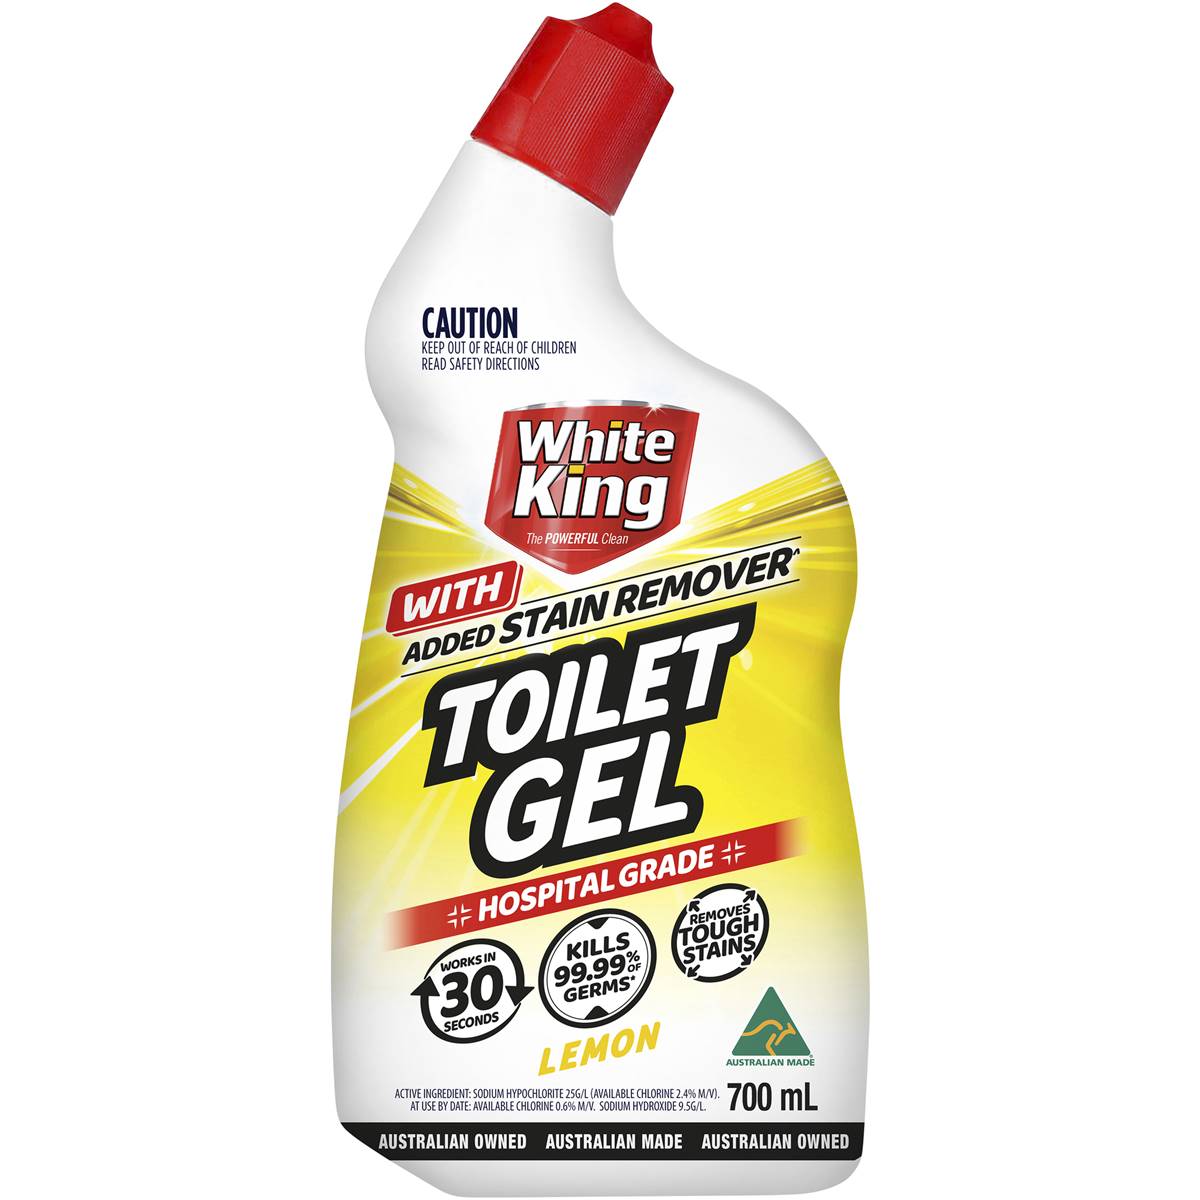 White King Toilet Gel With Added Stain Remover Lemon 700ml